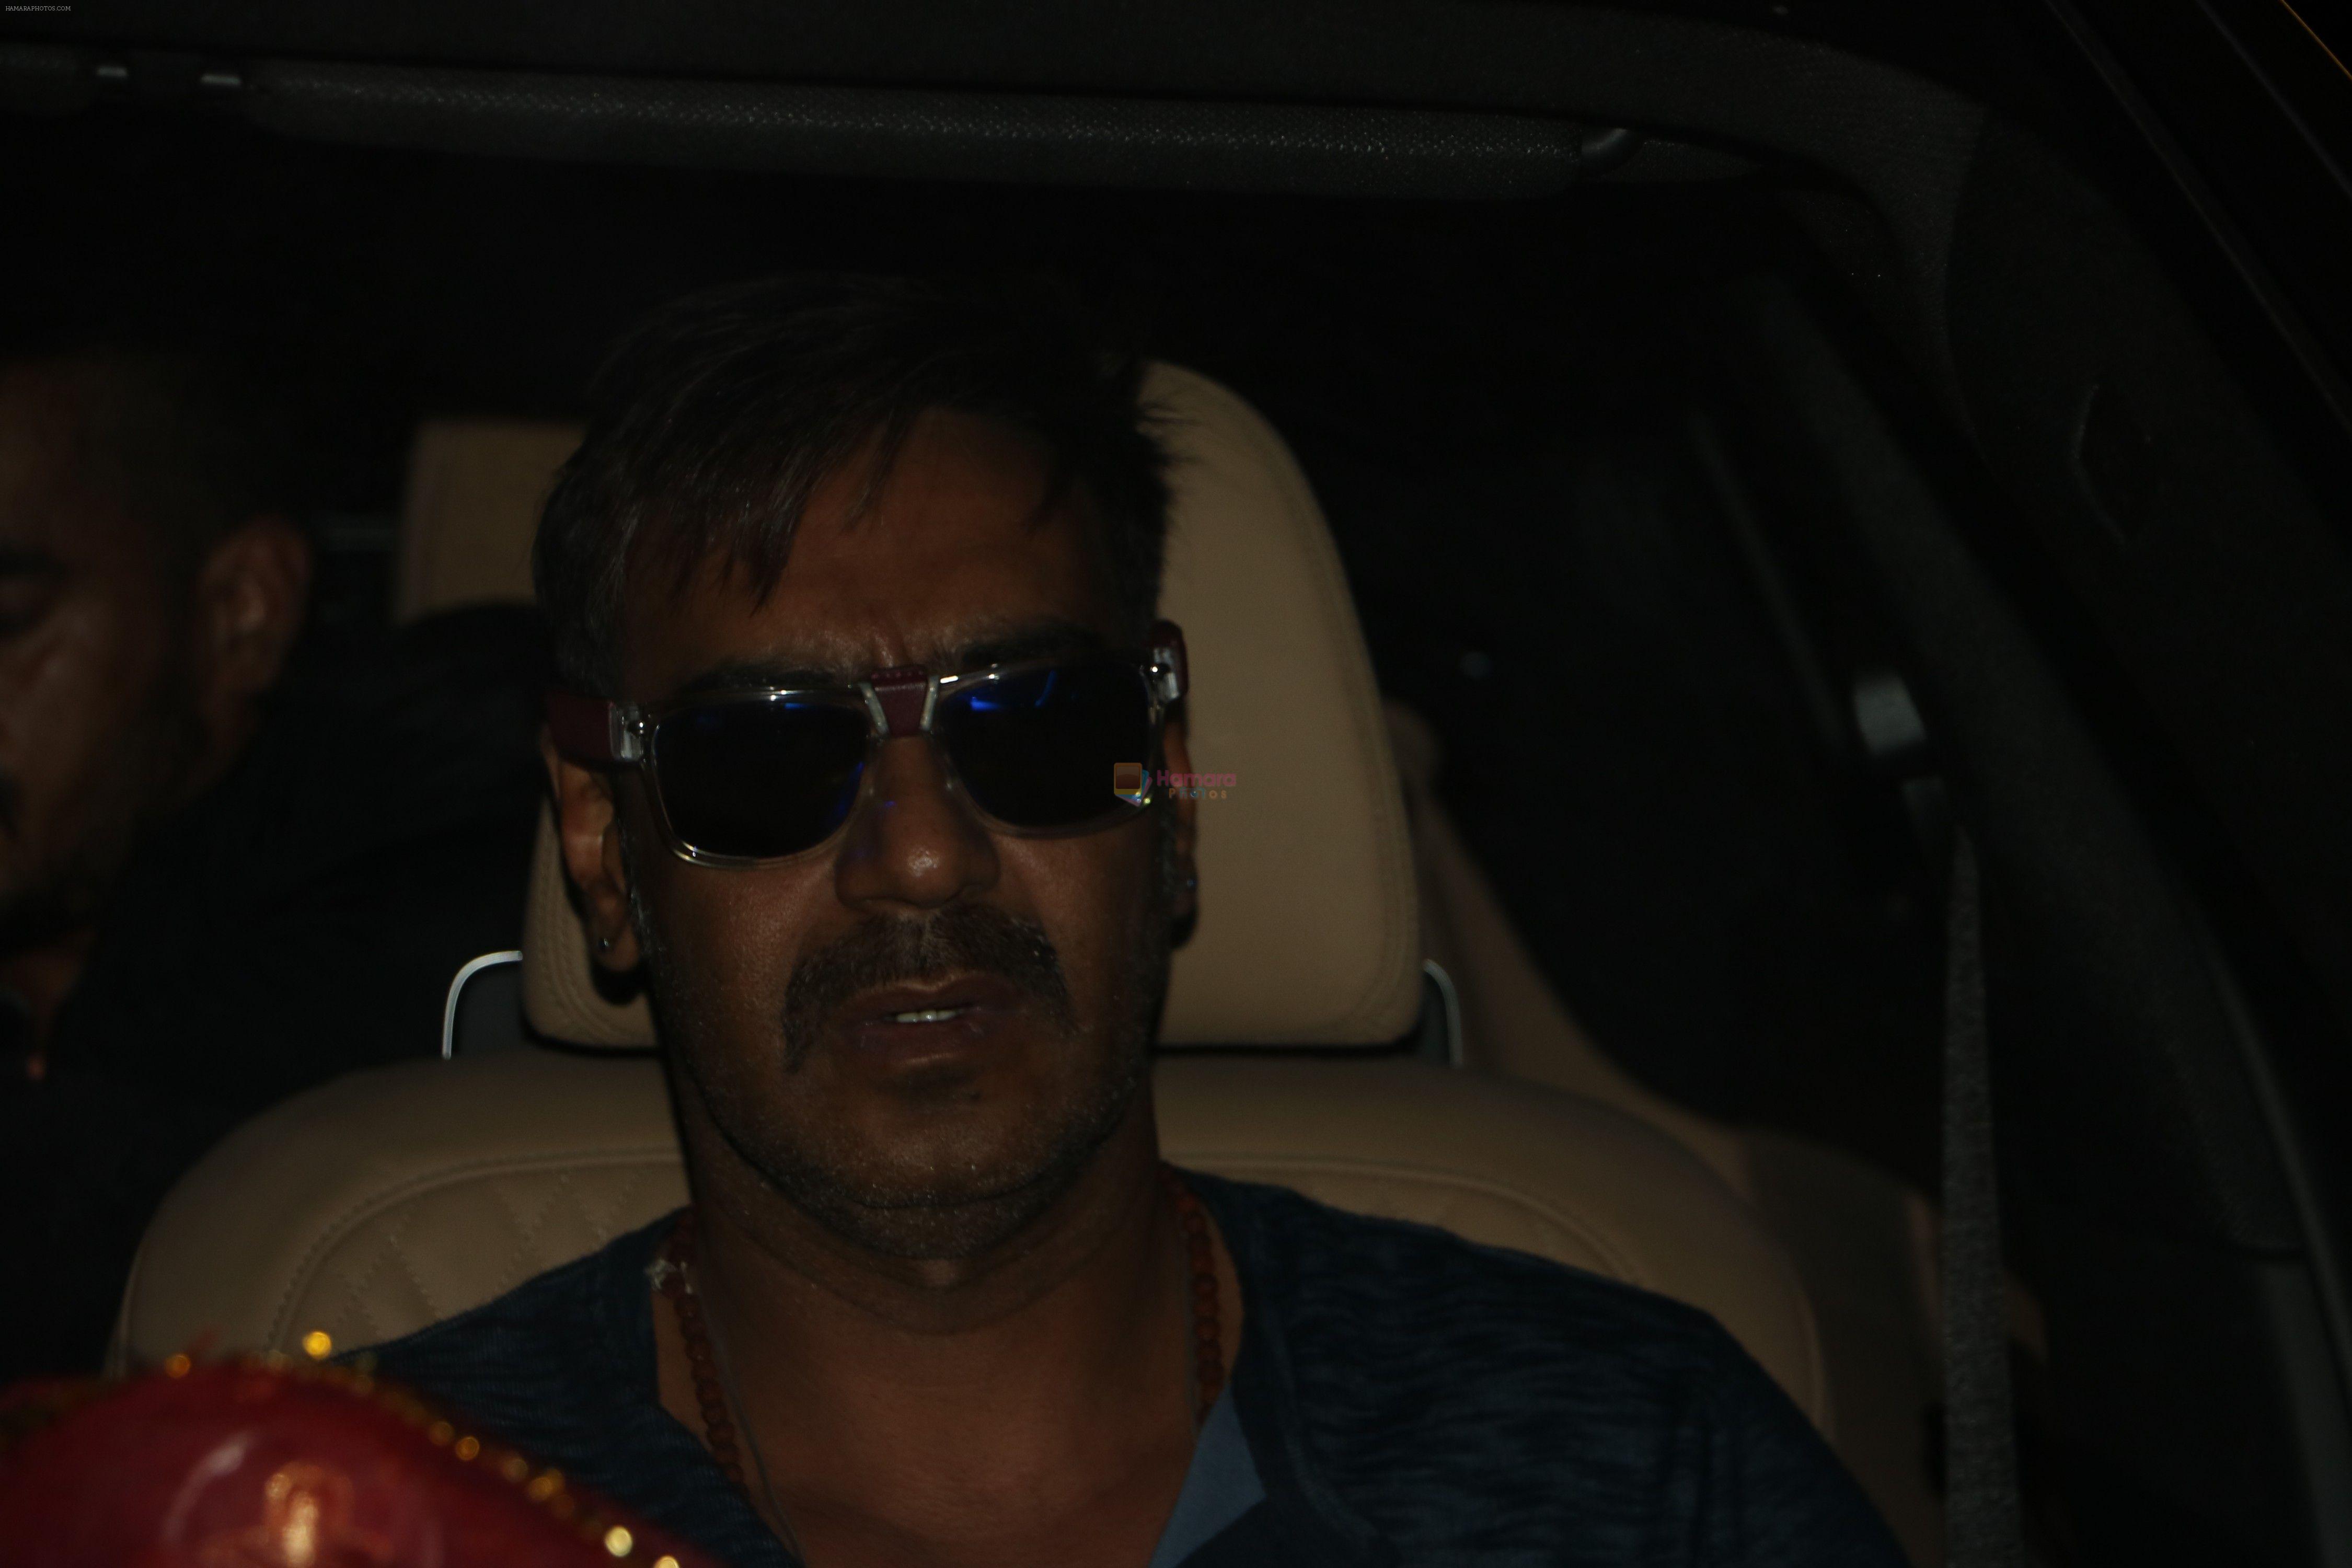 Ajay Devgan Spotted At Airport  on 3rd Oct 2017